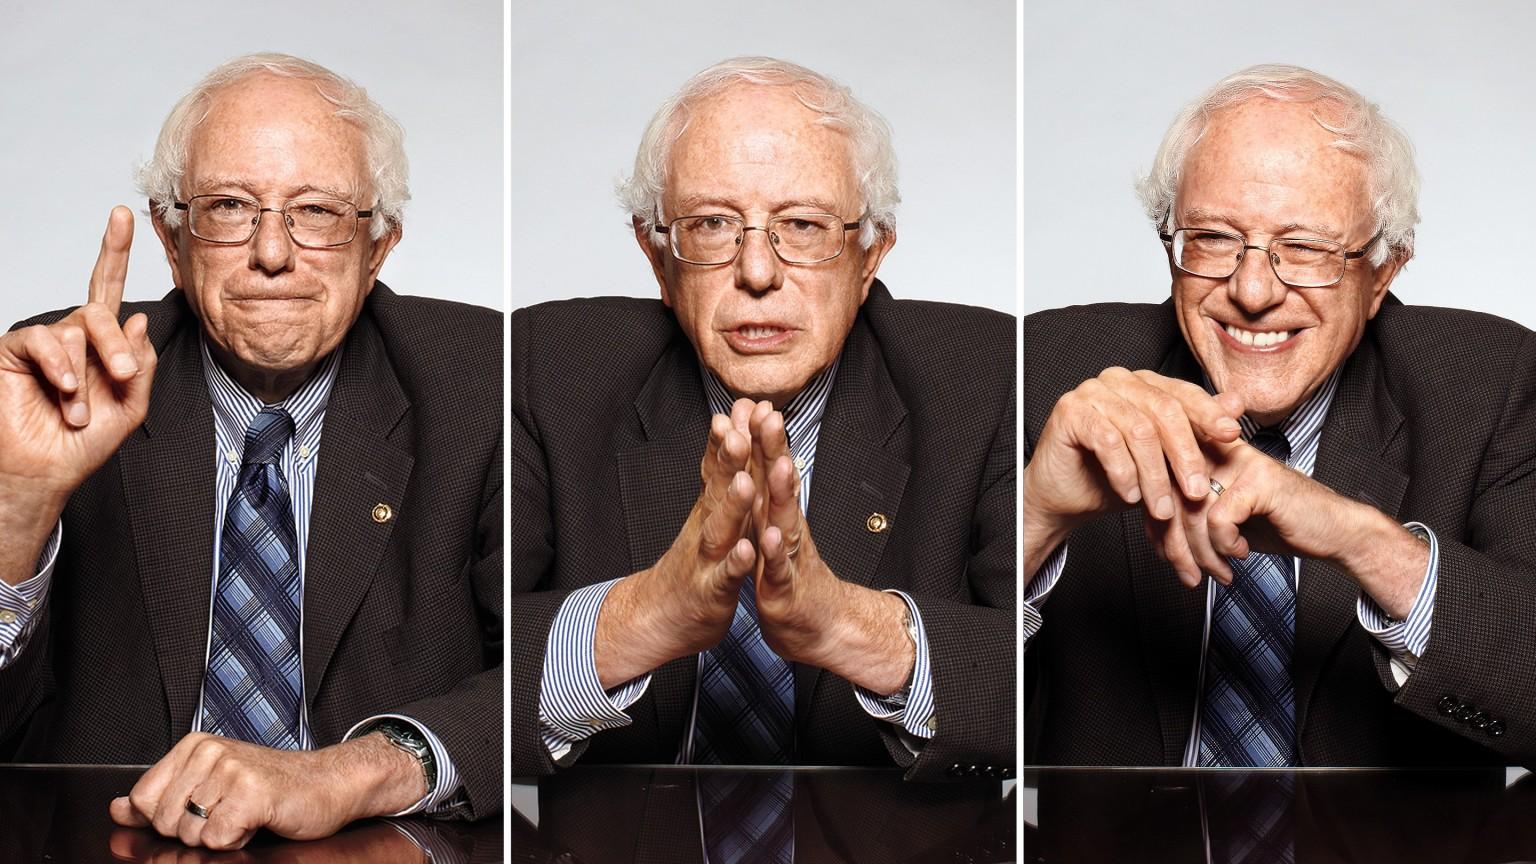 The November 2013 Playboy Interview With Bernie Sanders